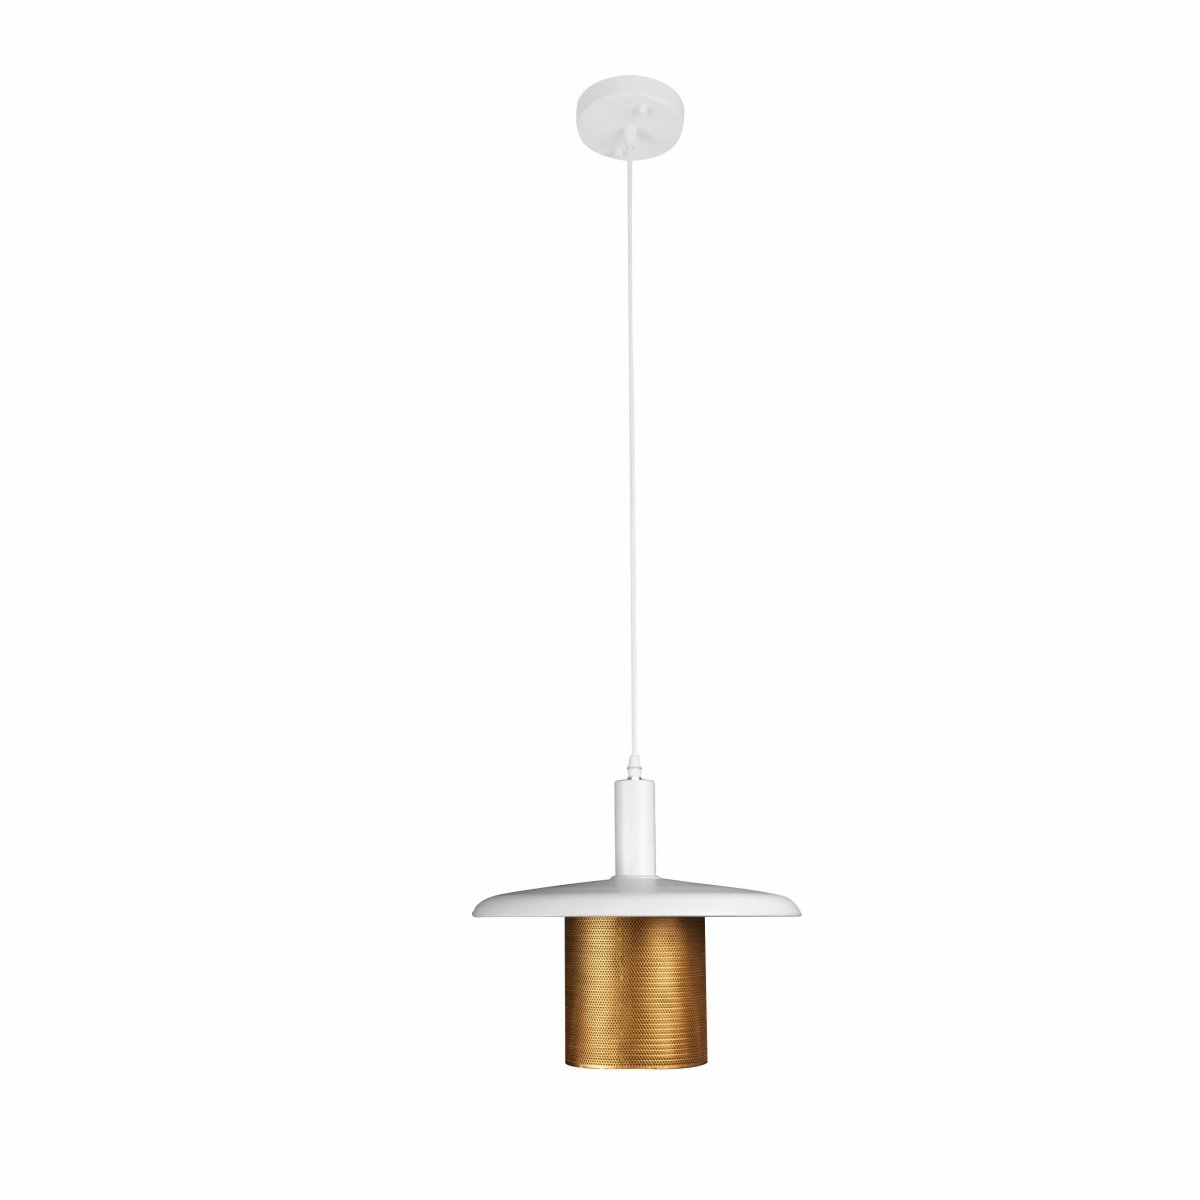 Main image of White-Golden Metal Caged Flat Pendant Light Large with E27 Fitting | TEKLED 150-18278